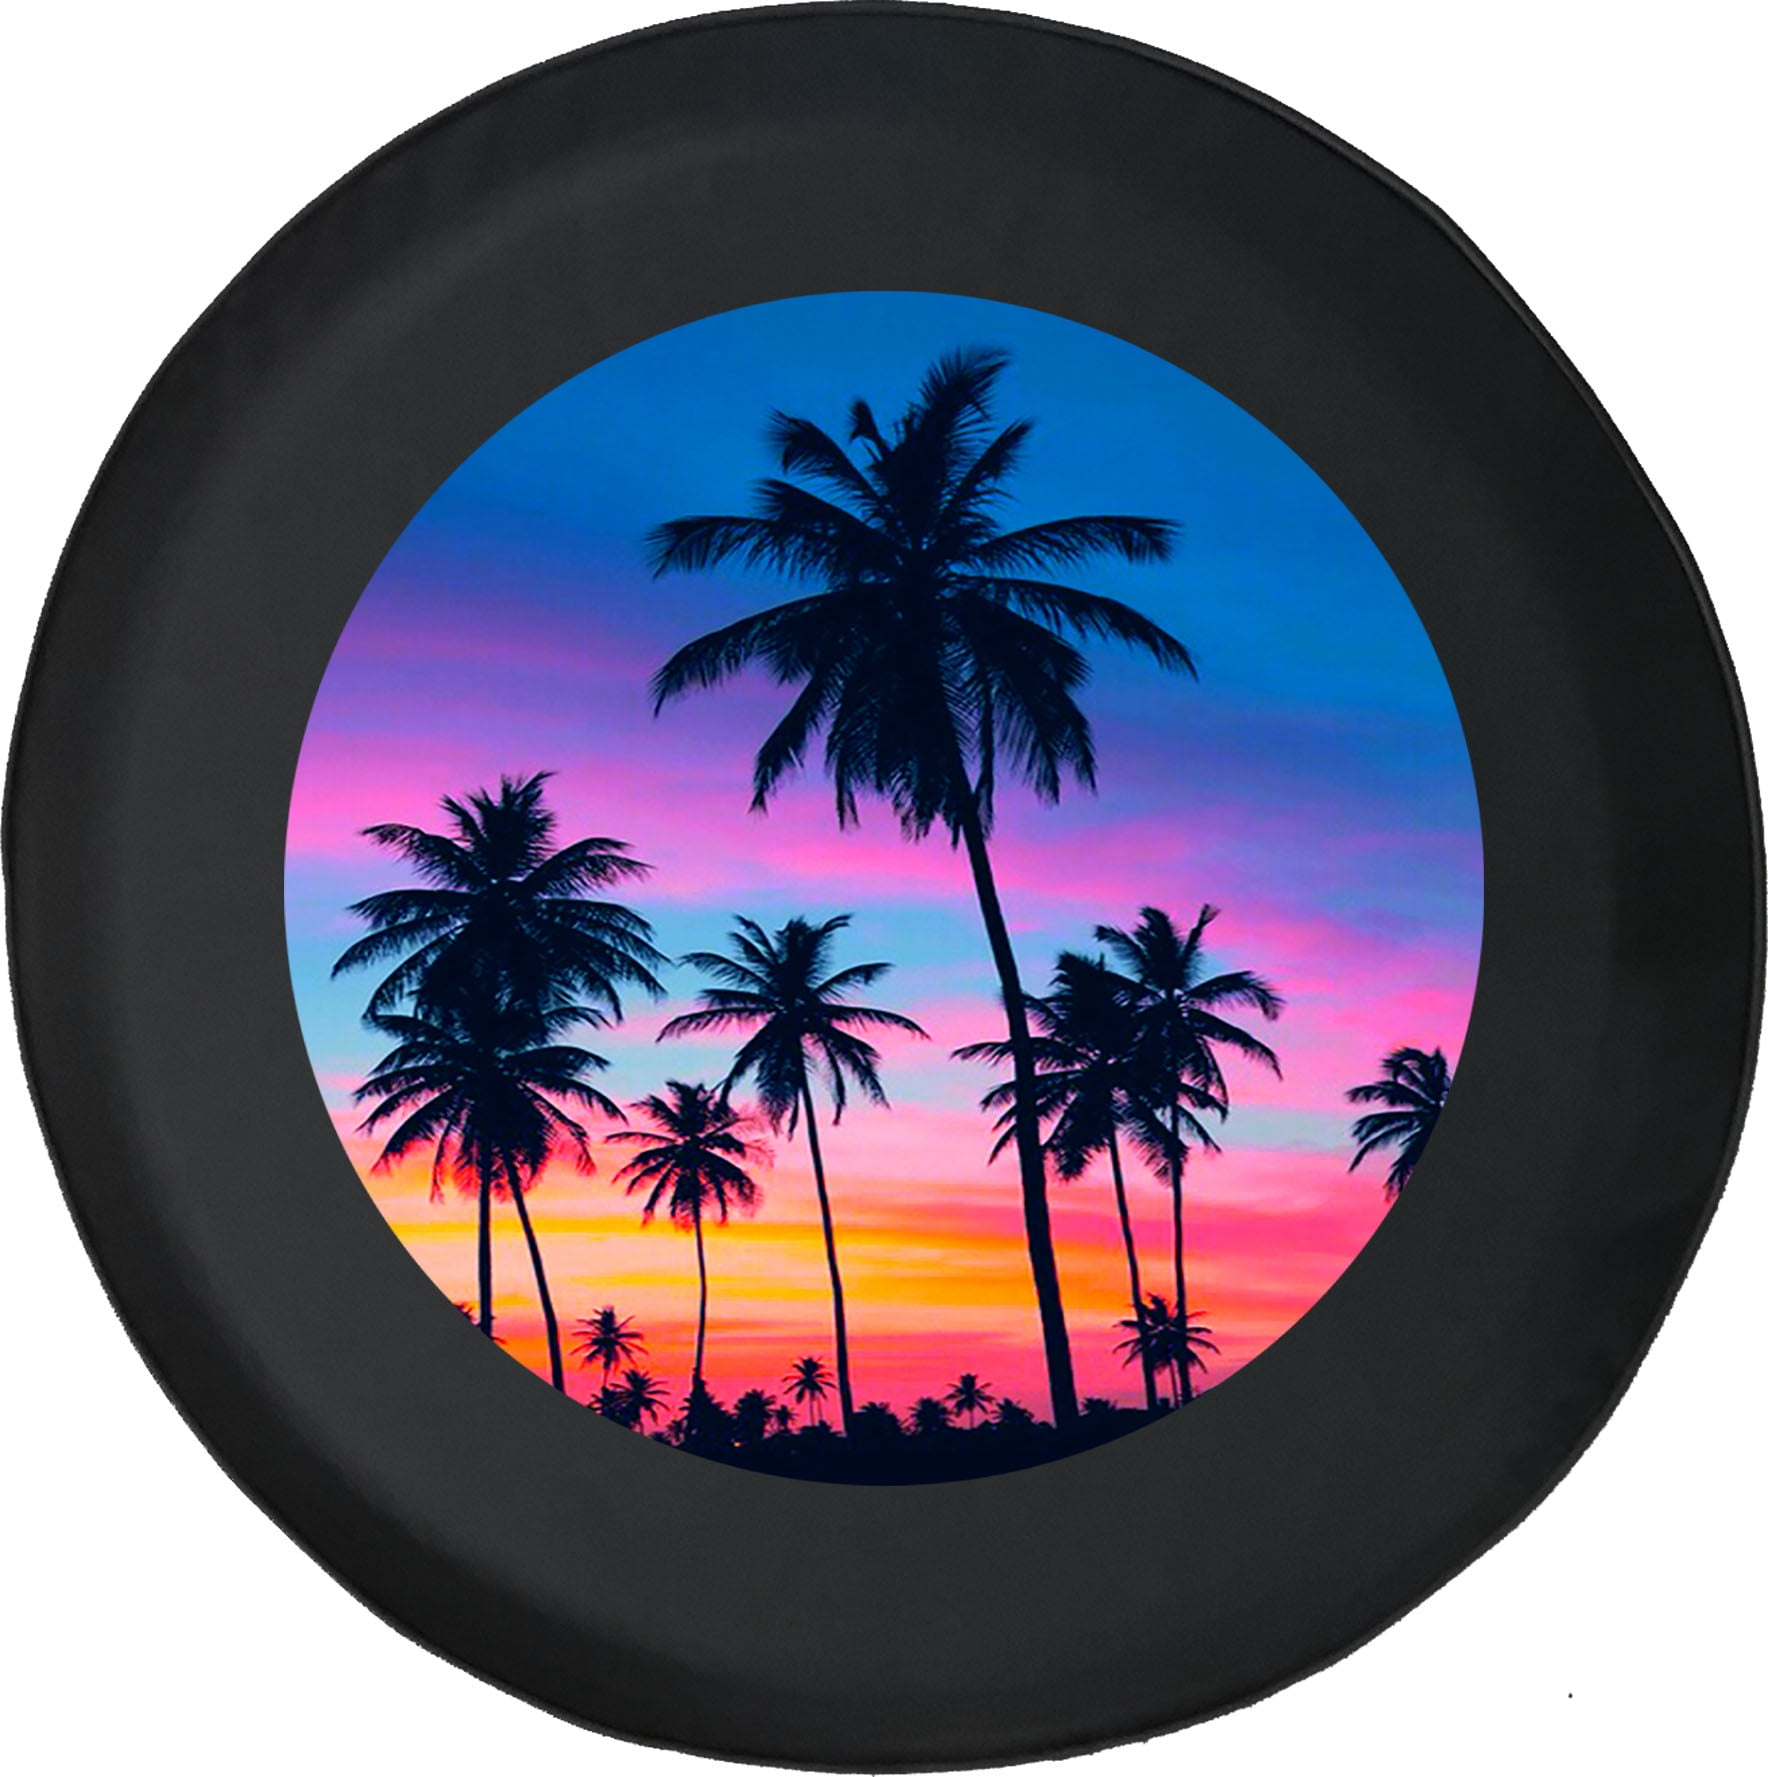 Foruidea Tropical Paradise Ocean Beach Scene with Palm Trees Spare Tire Cover Waterproof Dust-Proof Wheel Tire Cover Fit for Jeep,Trailer RV SUV and Many Vehicle 17 Inch 